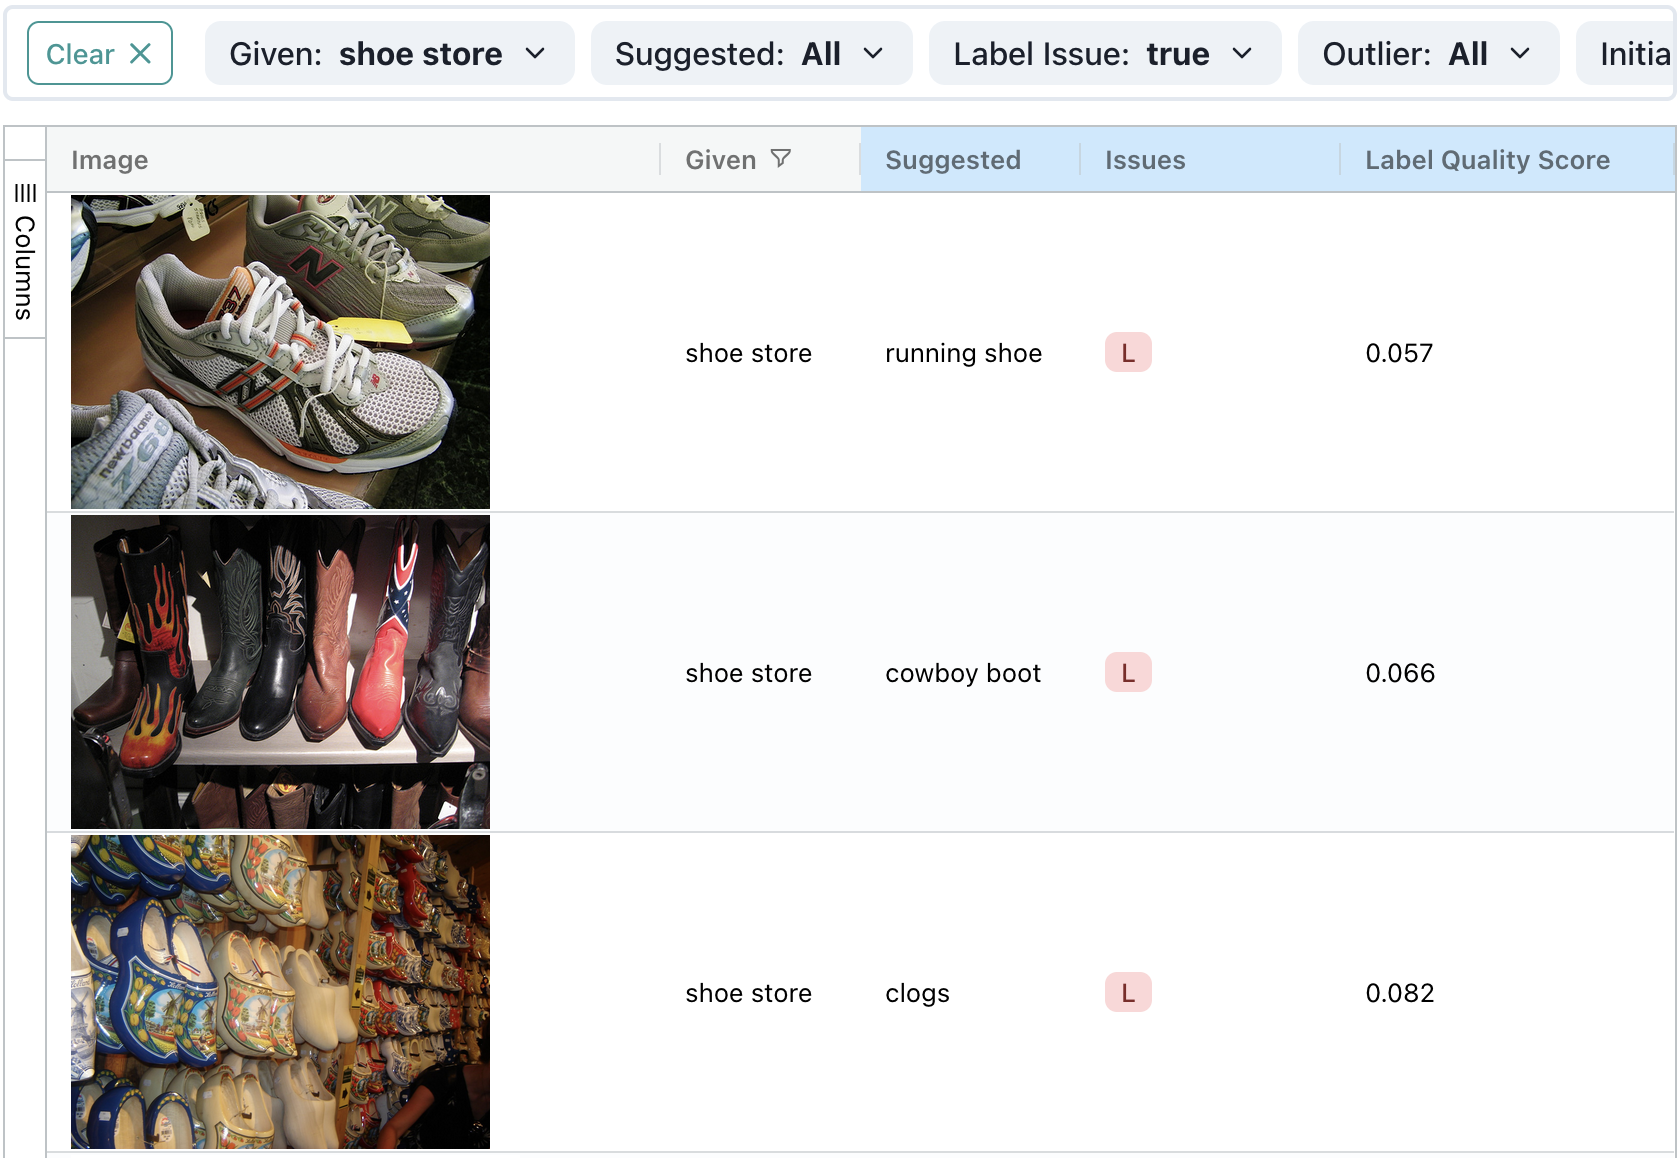 Images of shoe stores, with various types of shoes contained therein